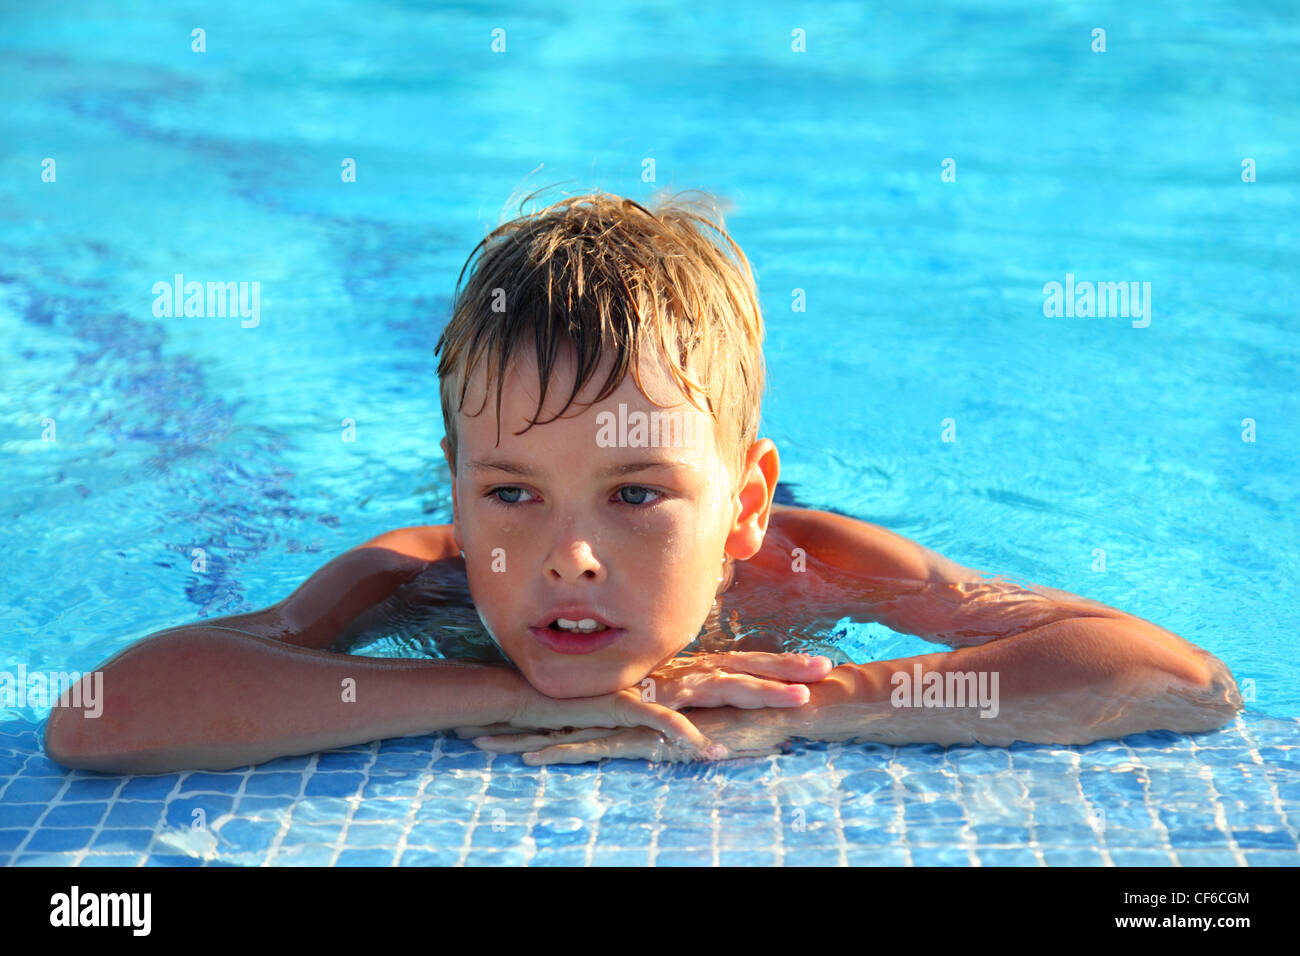 Little boy lies in swimming-pool and thoughtfully looks sideways Stock Photo